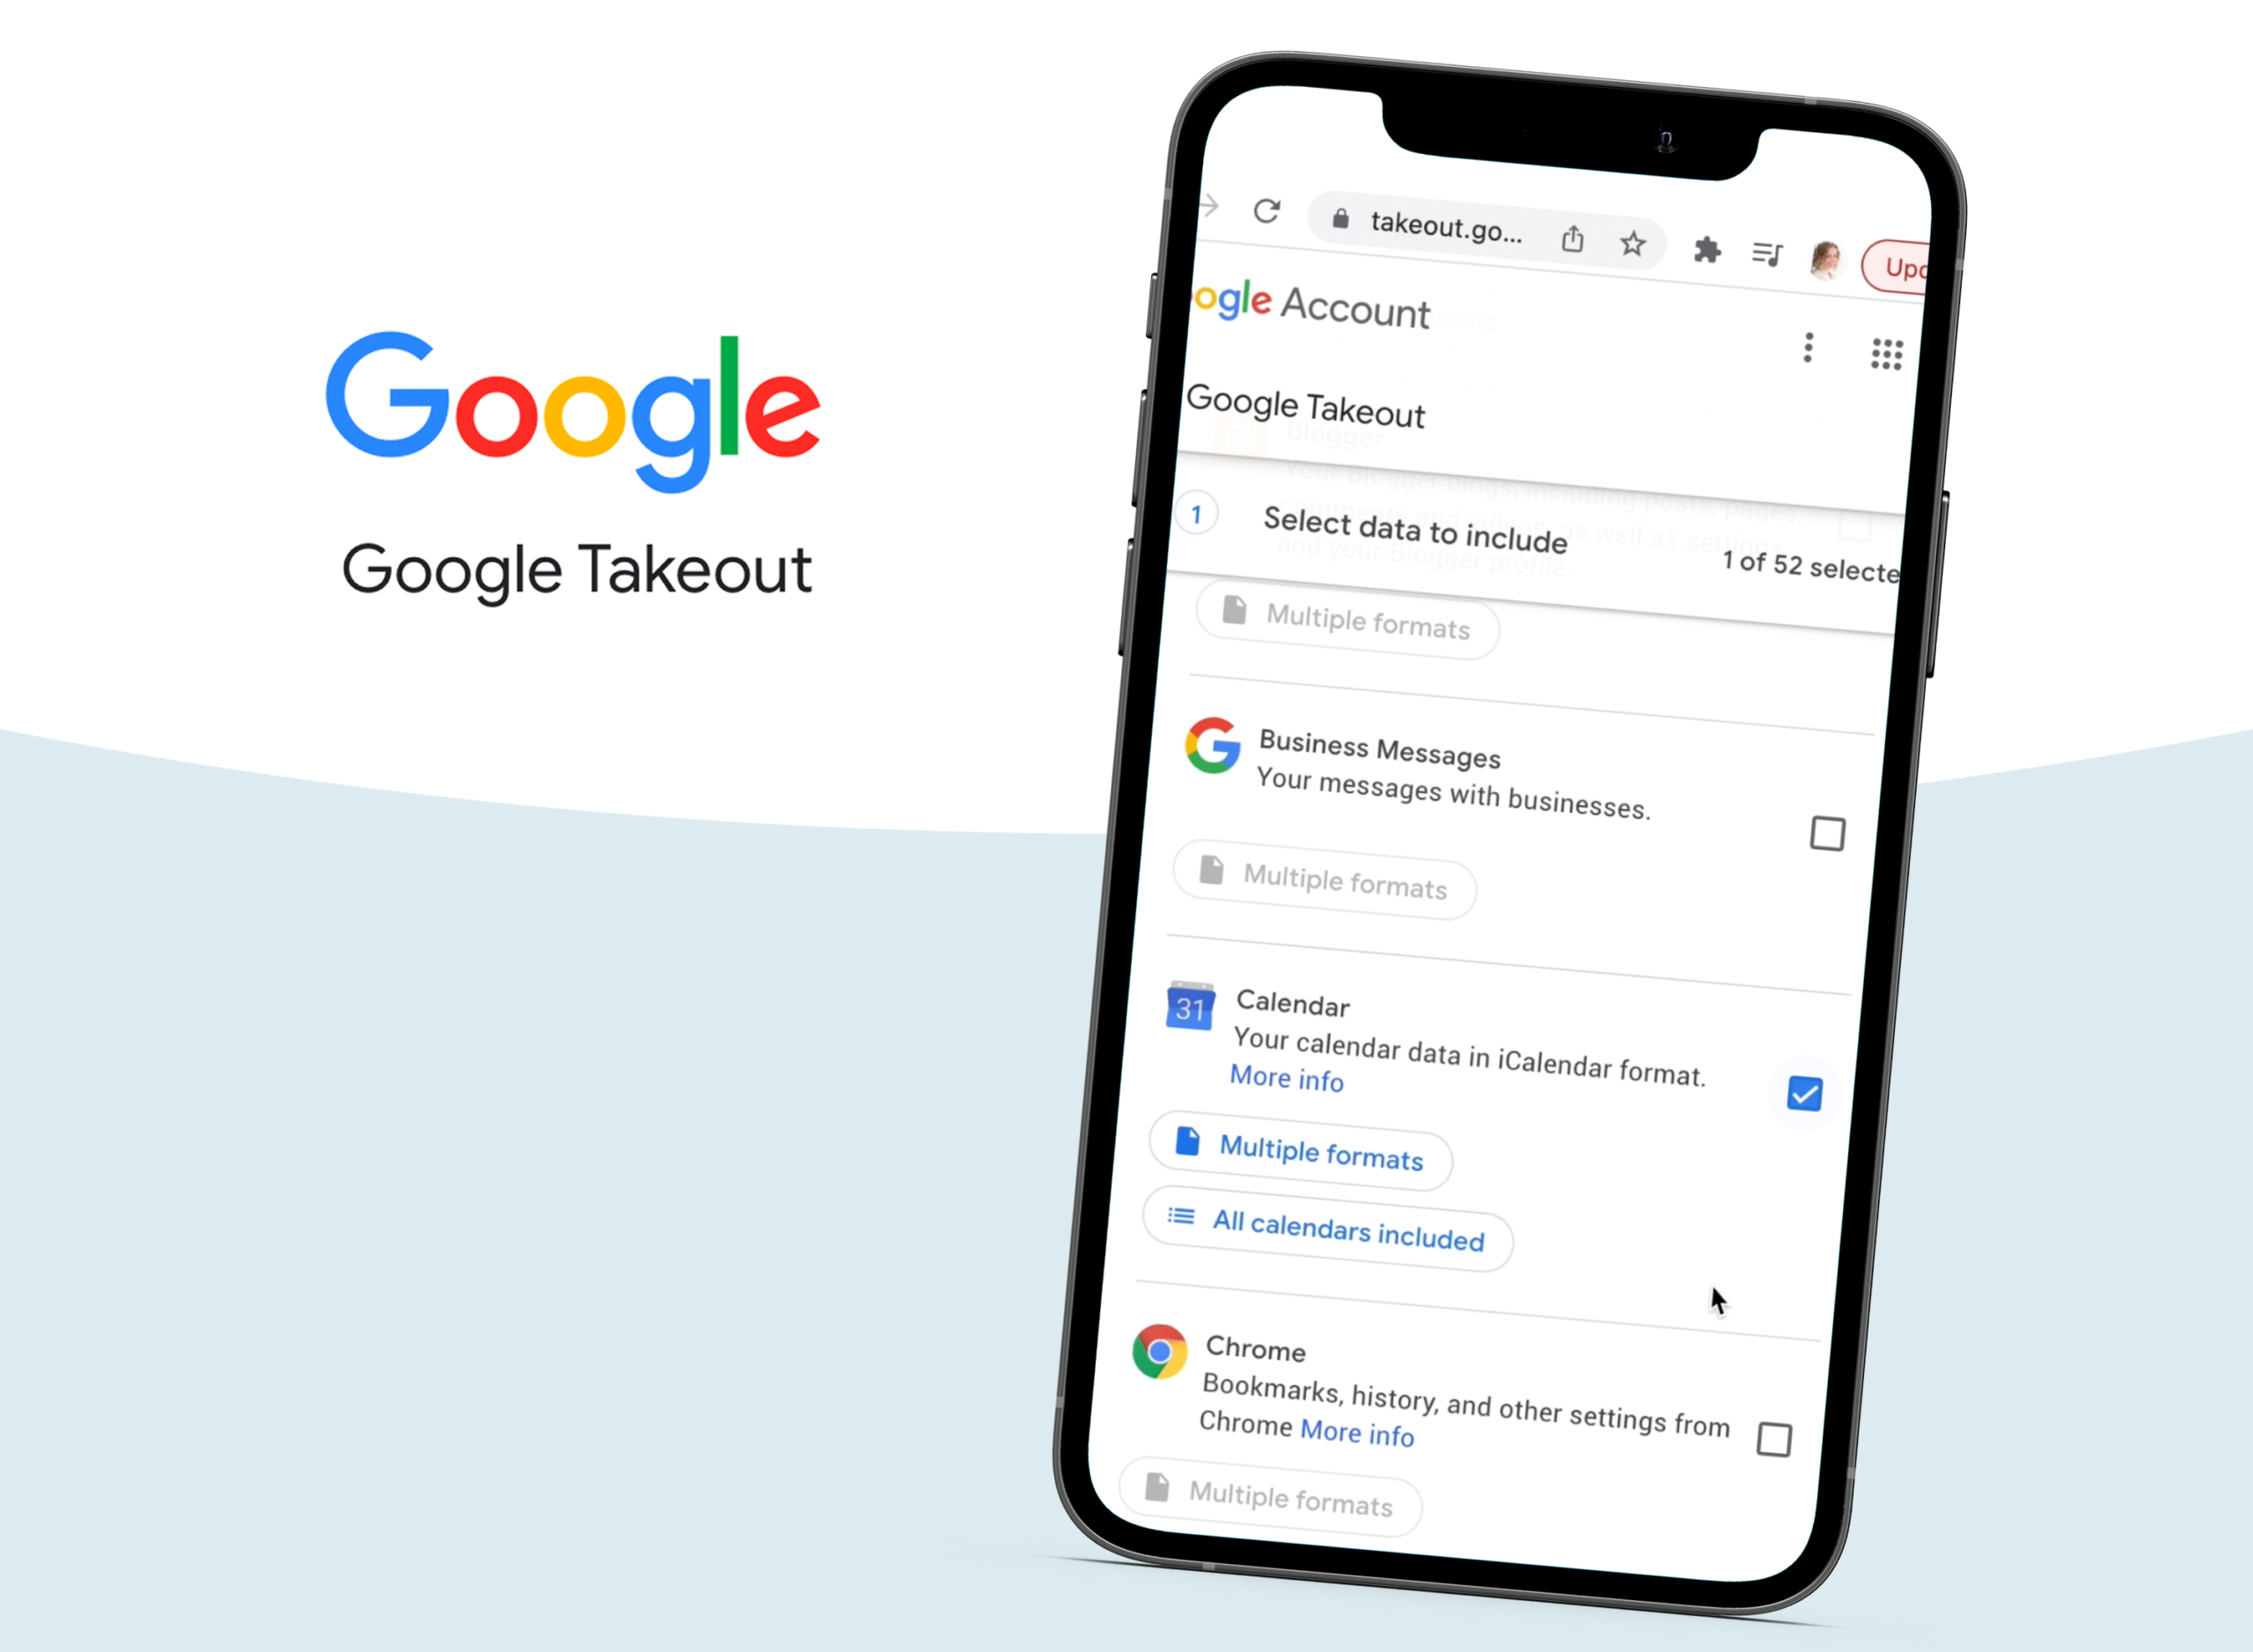 Google Takeout screen on a mobile phone